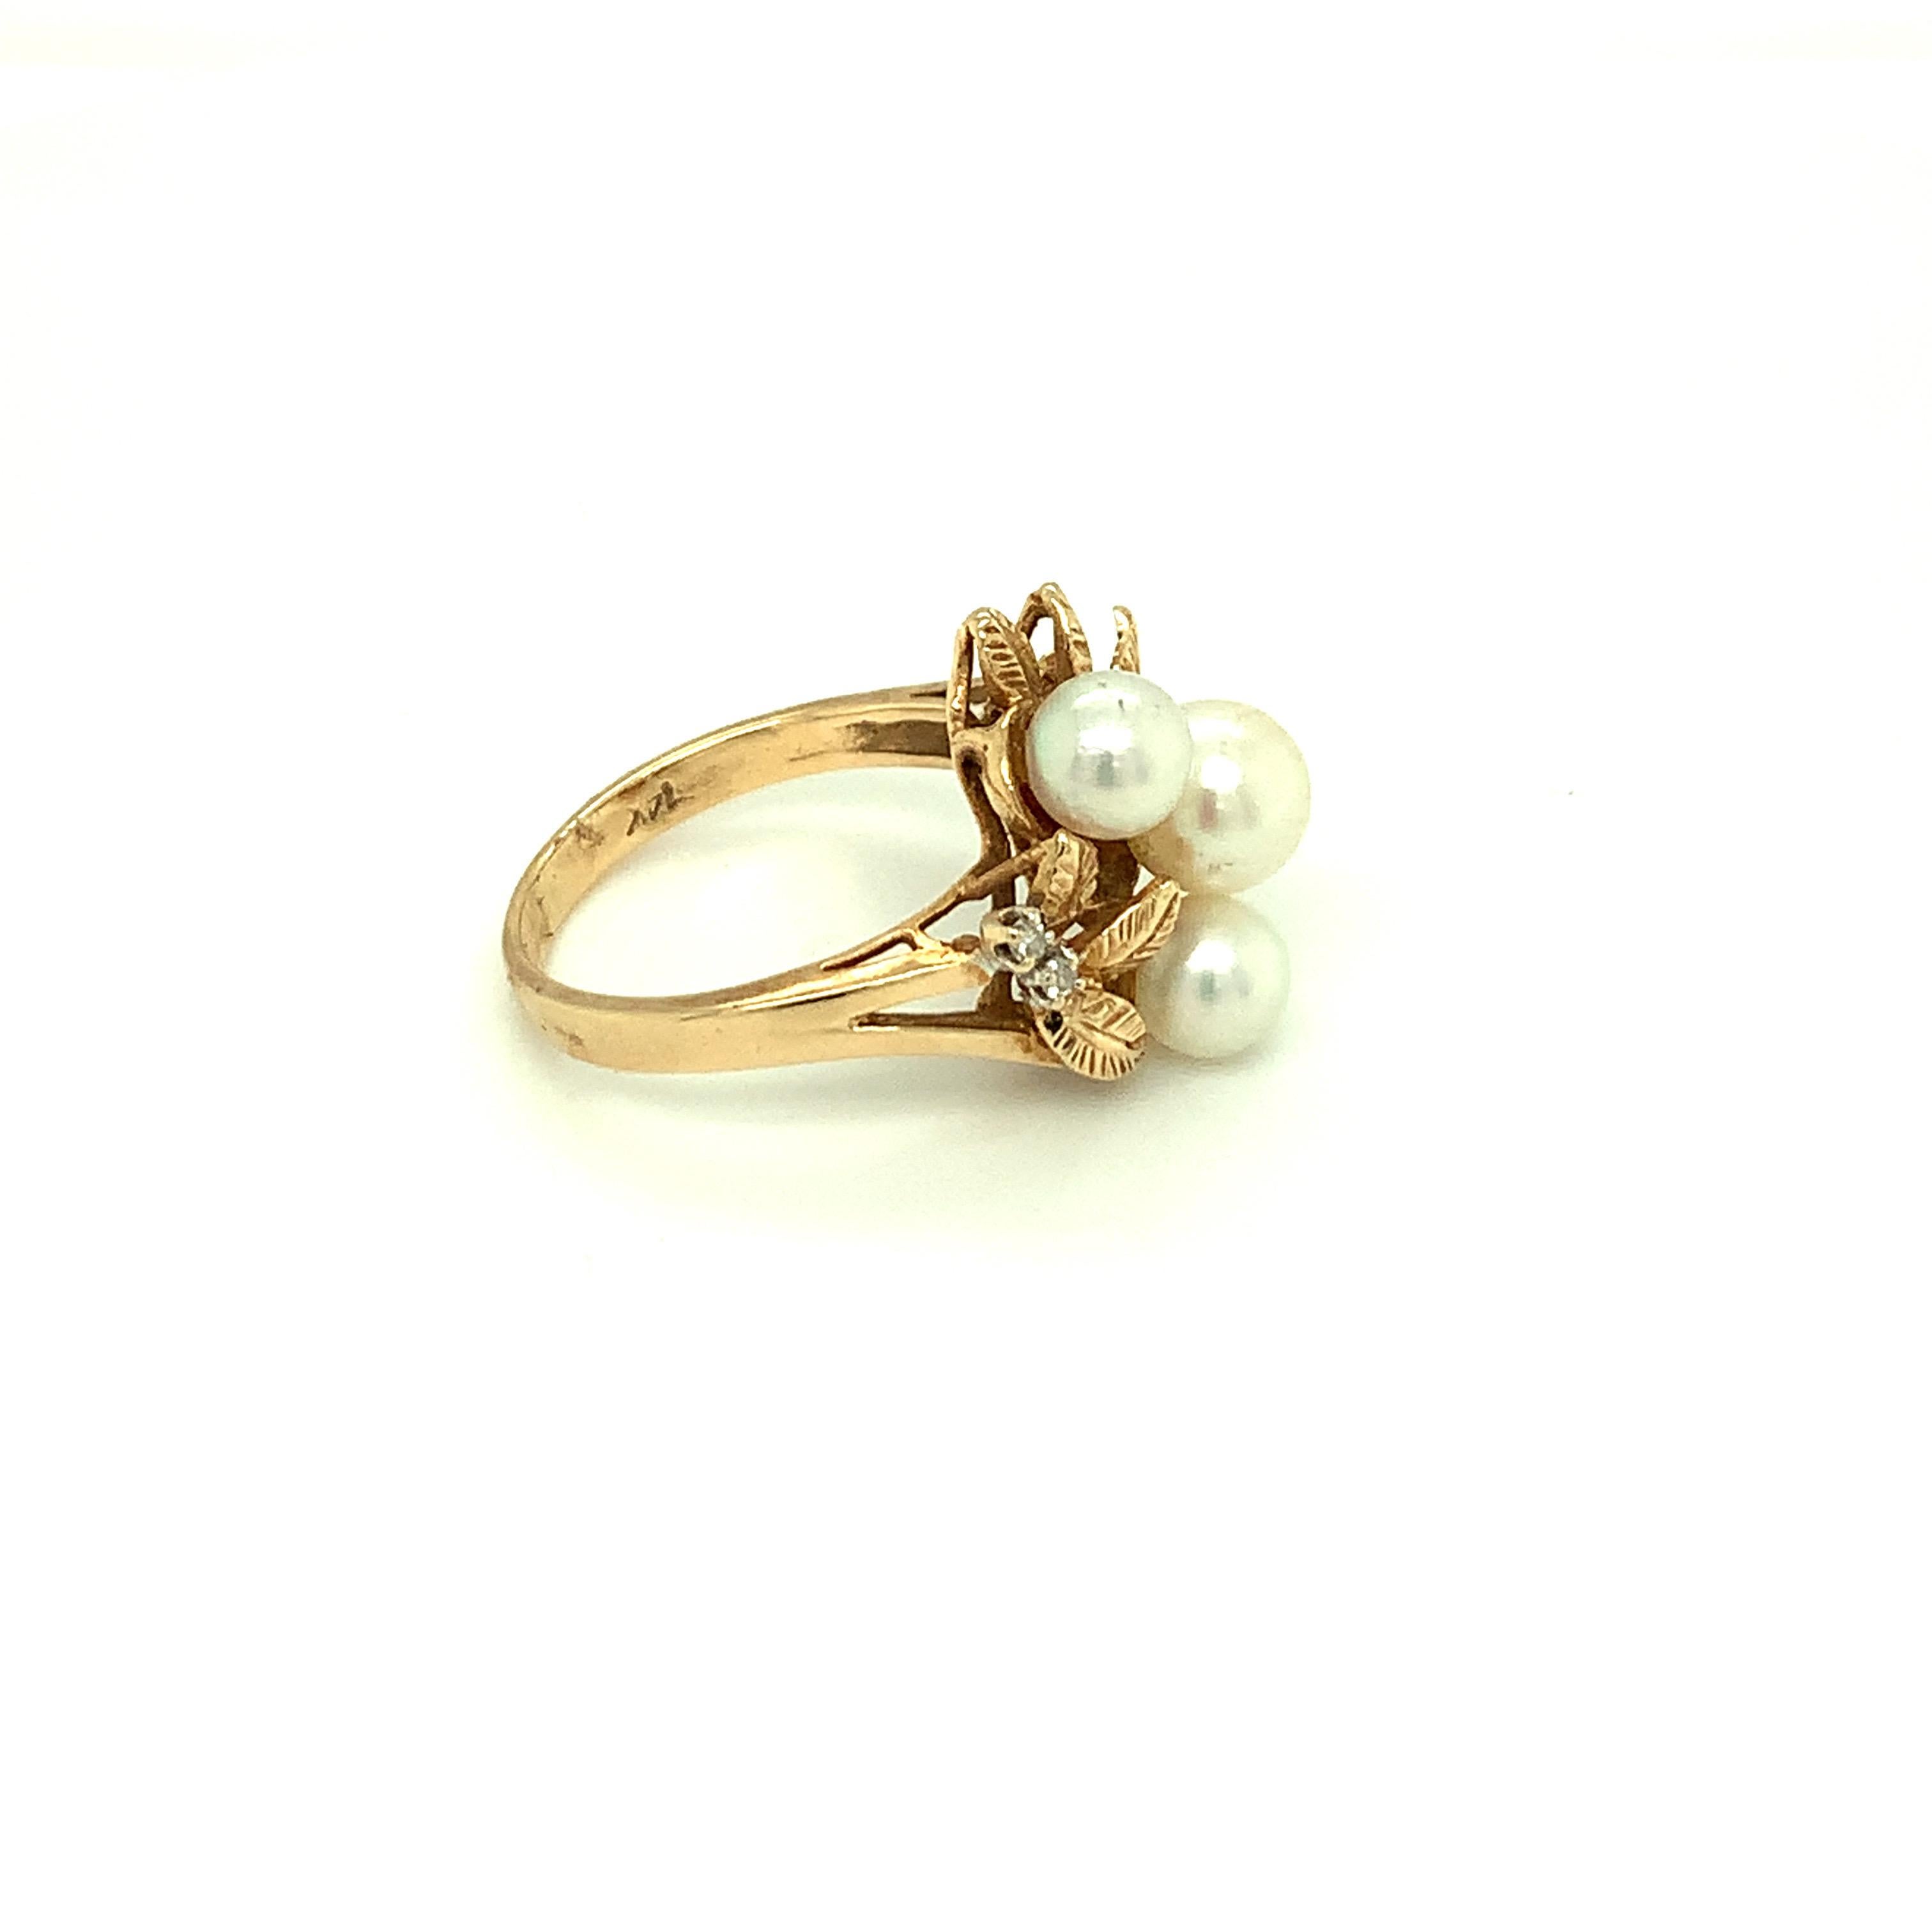 Round Cut Three Stone Pearl Ring Set in 14K Yellow Gold